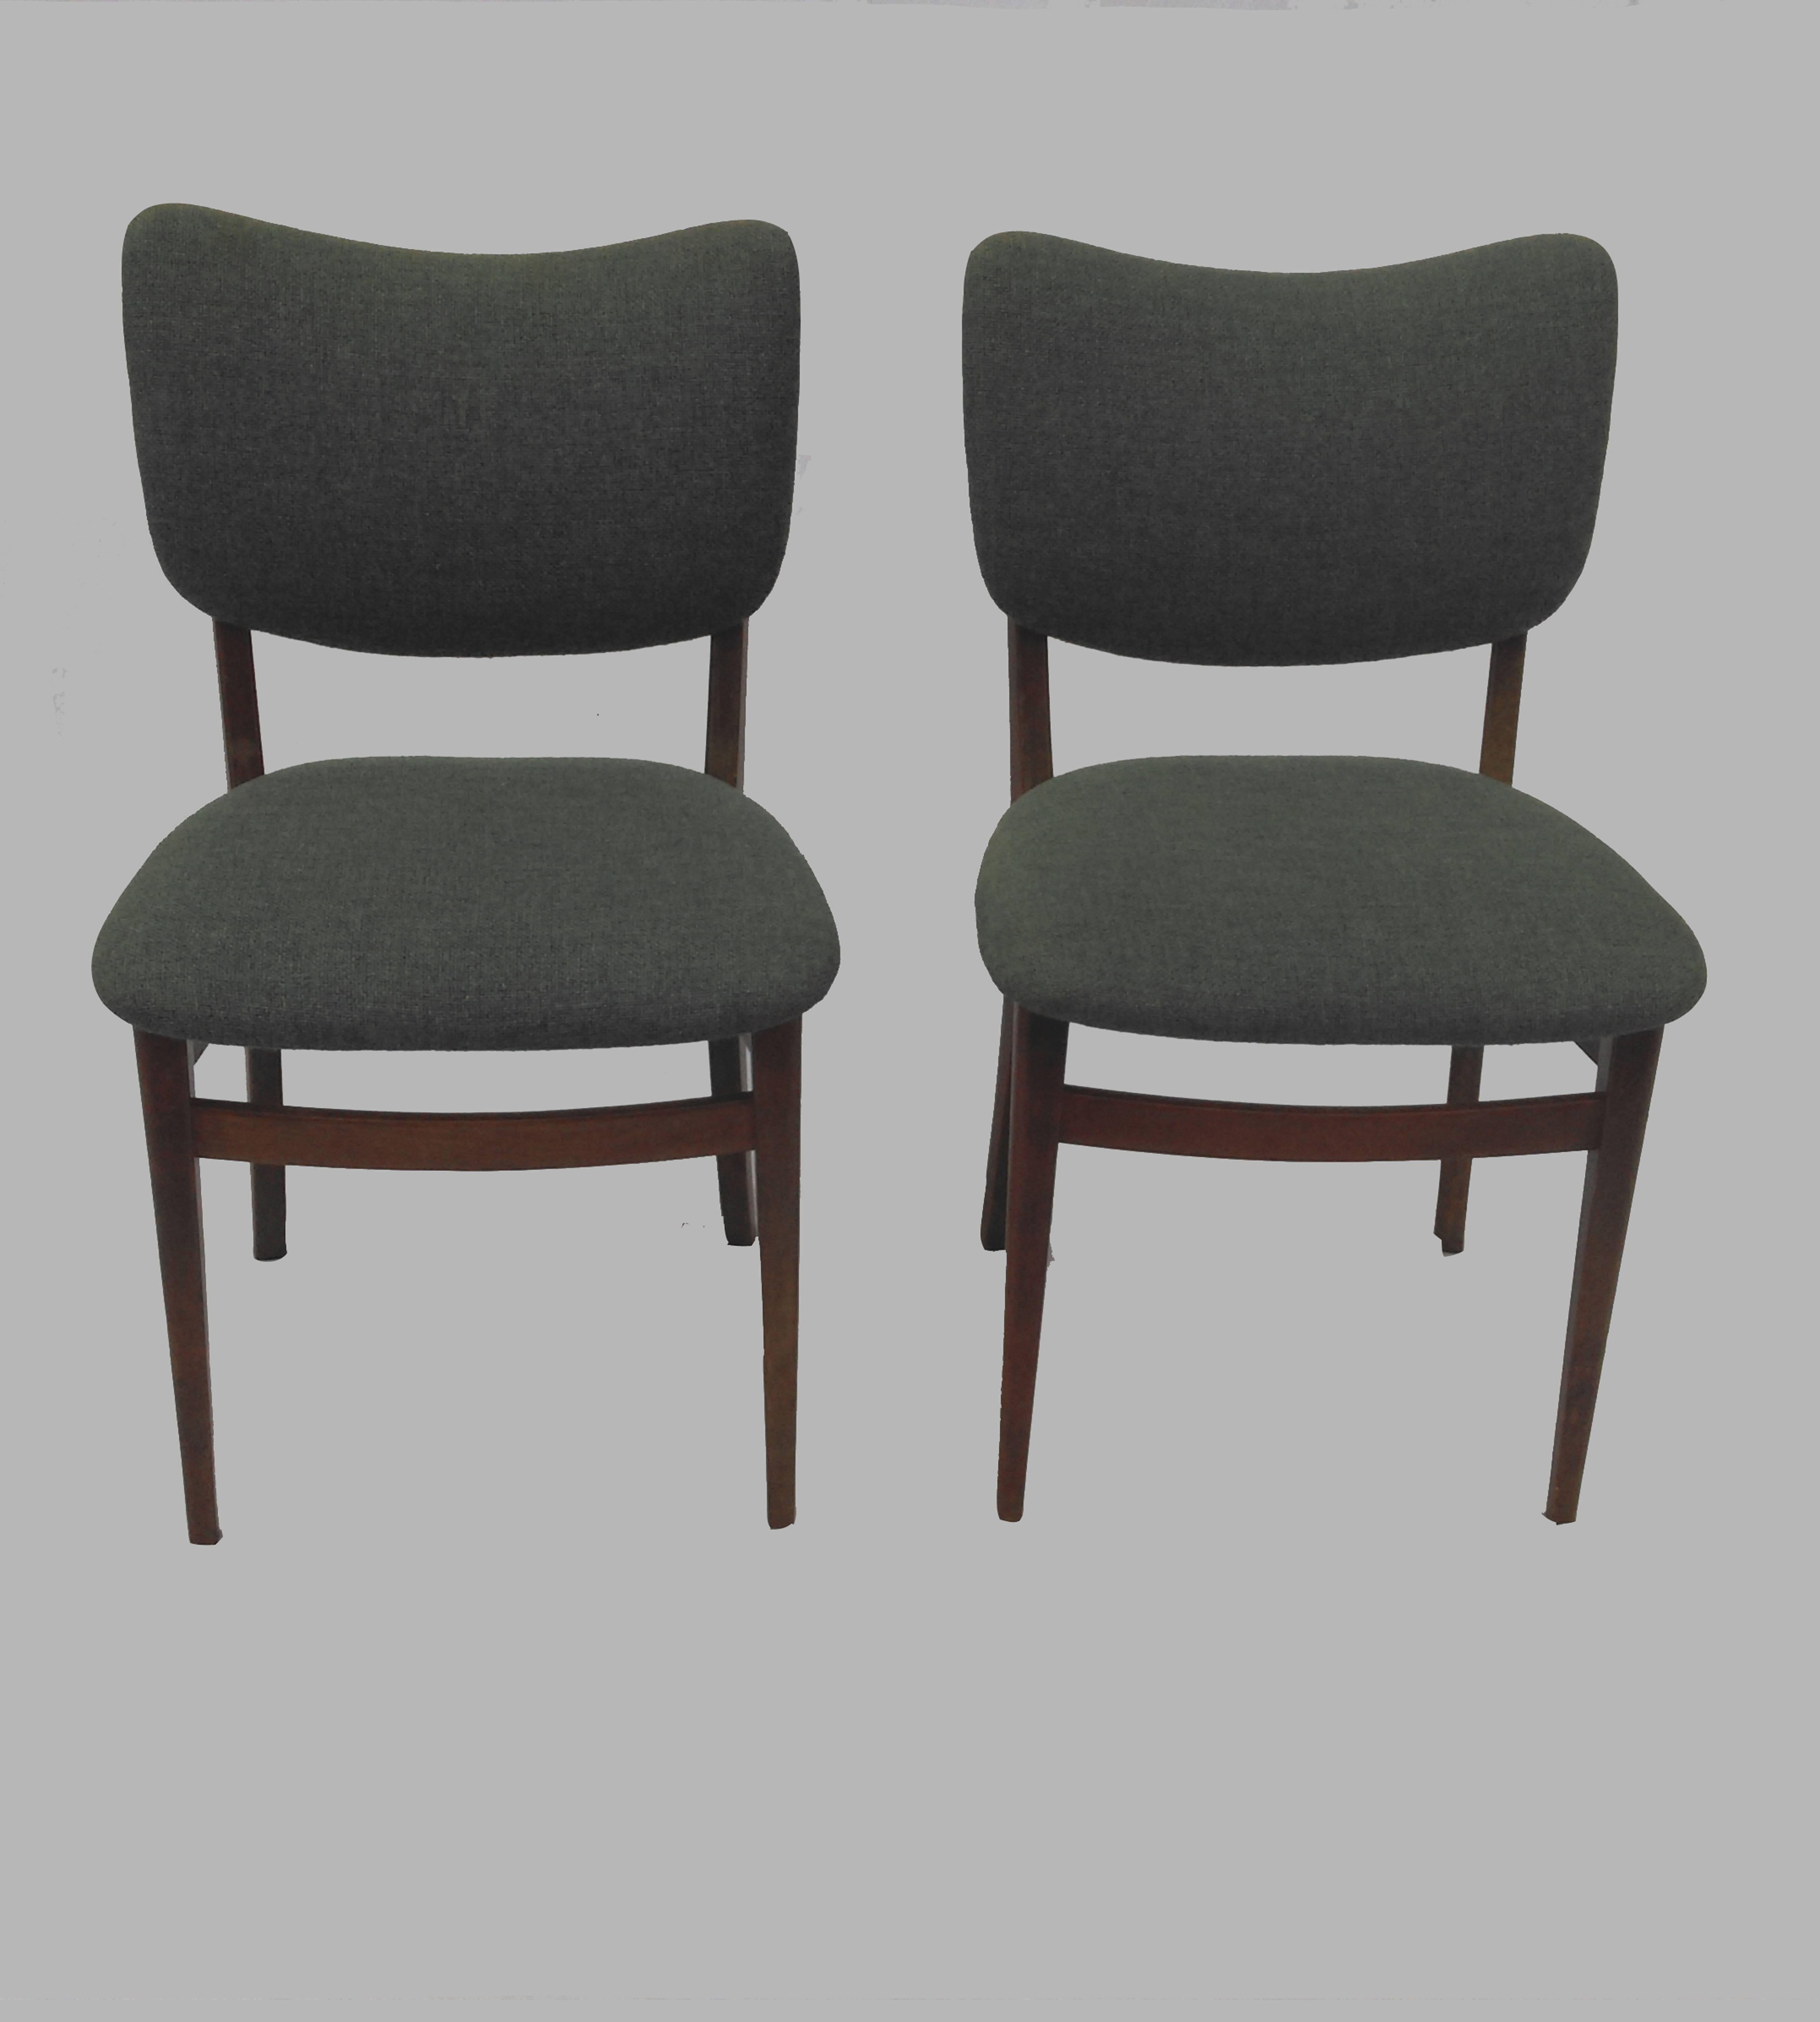 Set of two dining chairs or side chairs in tanned beech and blue fabric upholstery made by Danish cabinetmaker in the 1940s-1950s.

The chairs are well made and in good condition and feature lots of details with curves and elegant lines in both